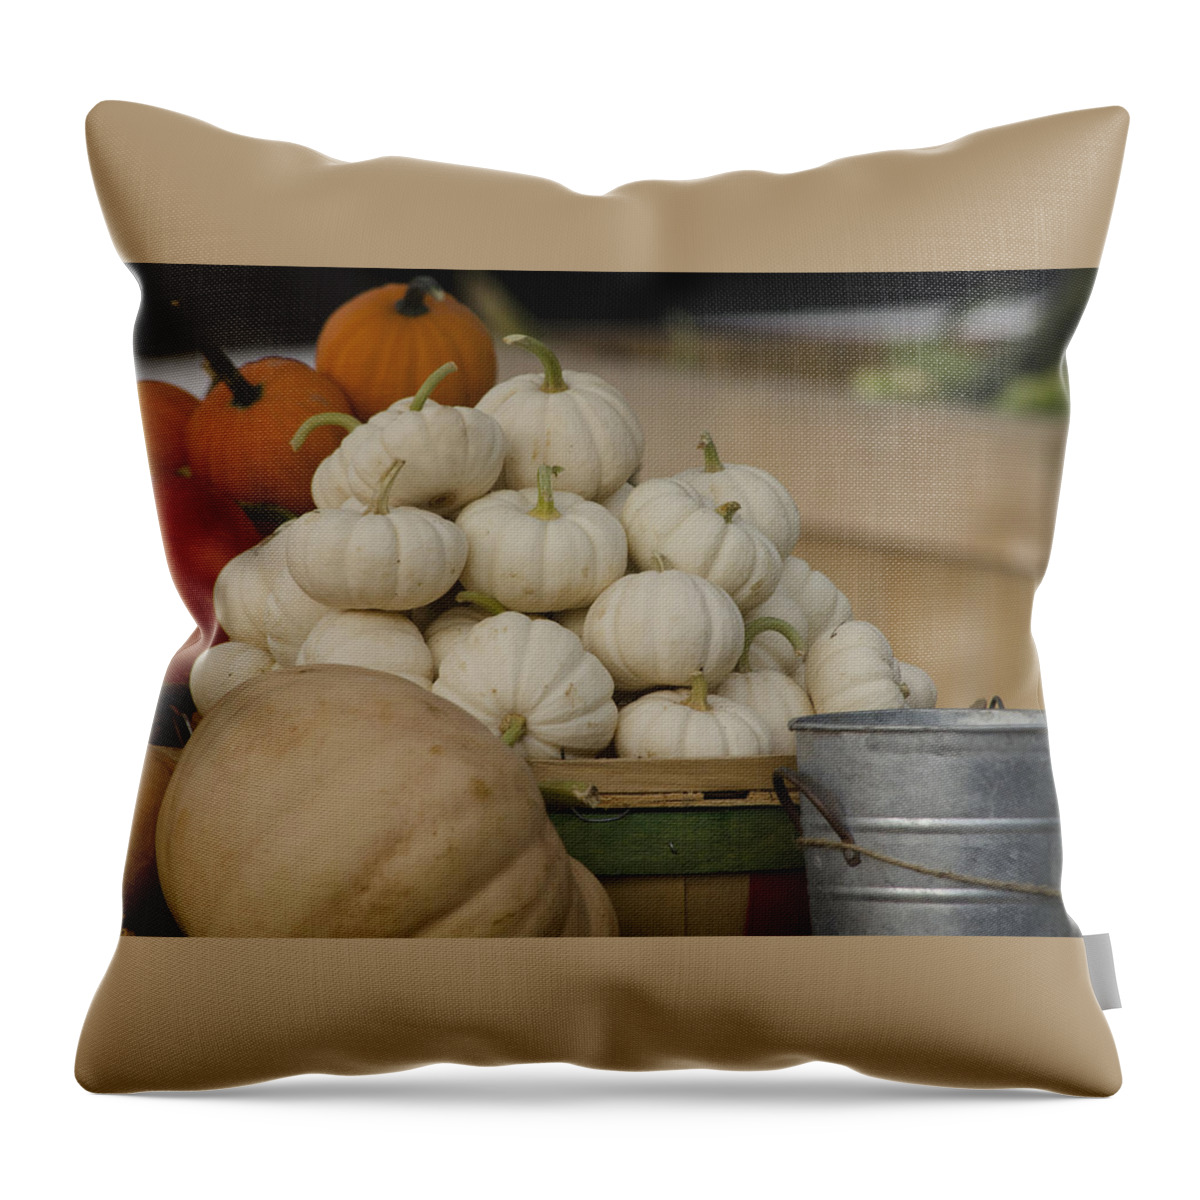 Fall Throw Pillow featuring the photograph Fall Is Coming by GeeLeesa Productions